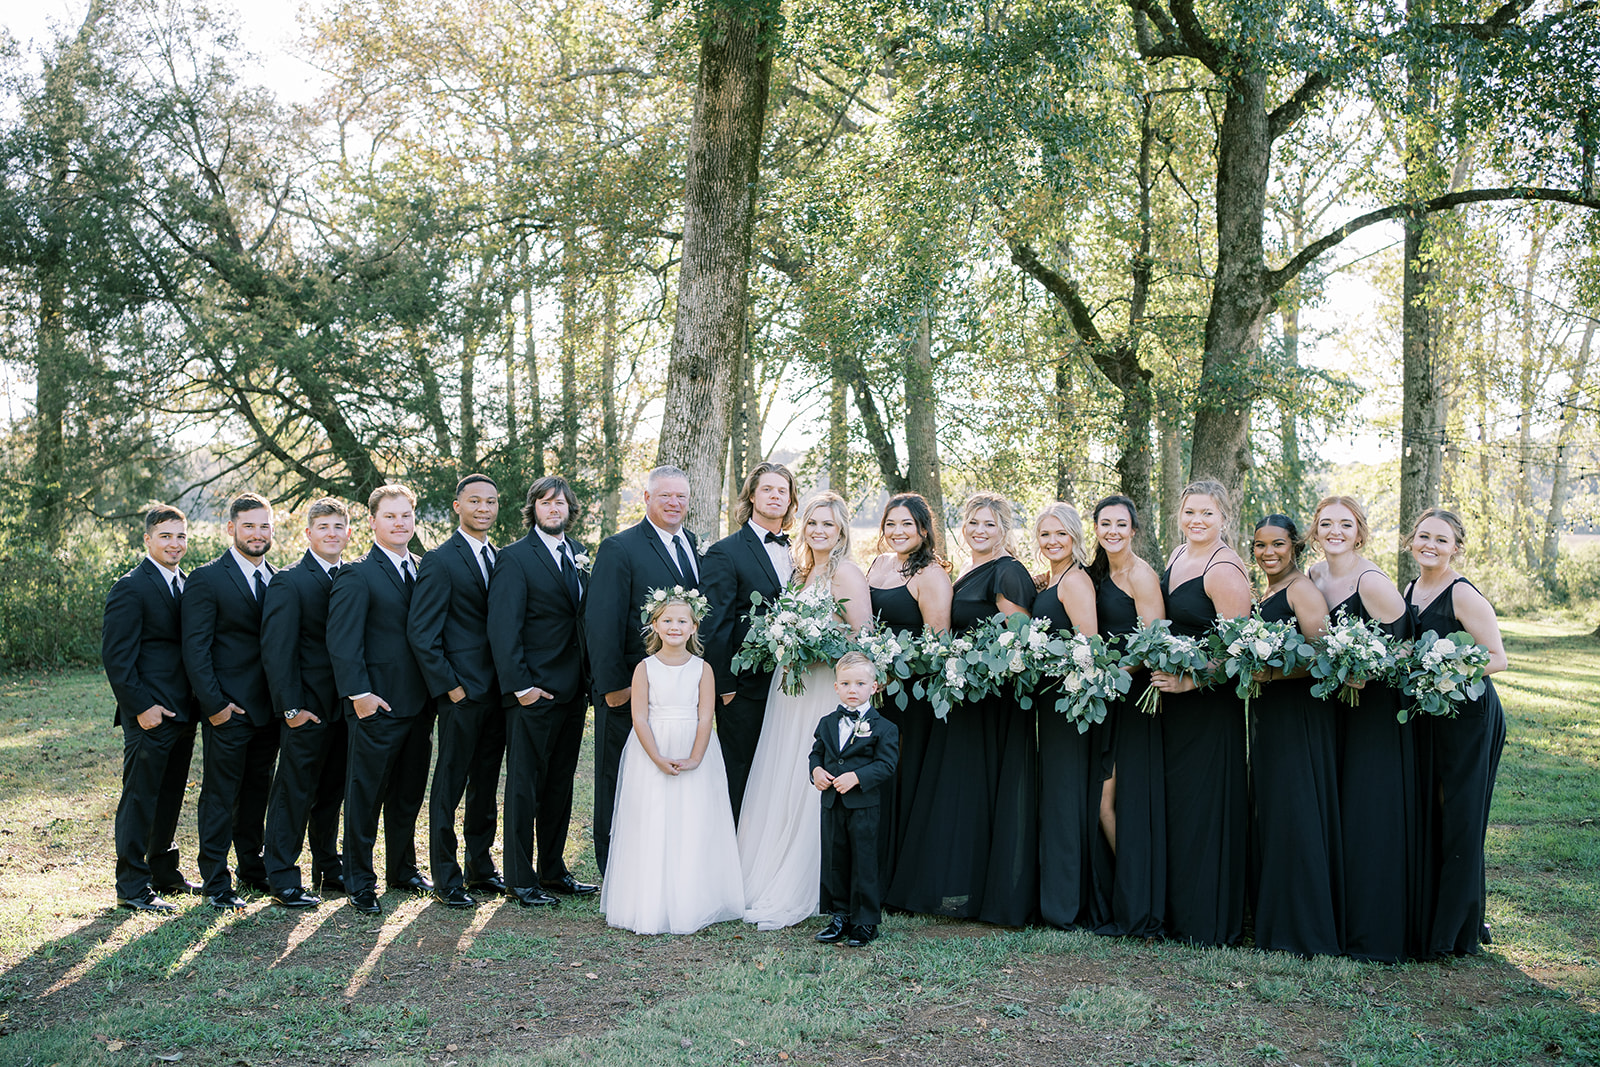 The wedding party stands together in all black for a fall wedding at Harvest Hollow in Toney, Alabama